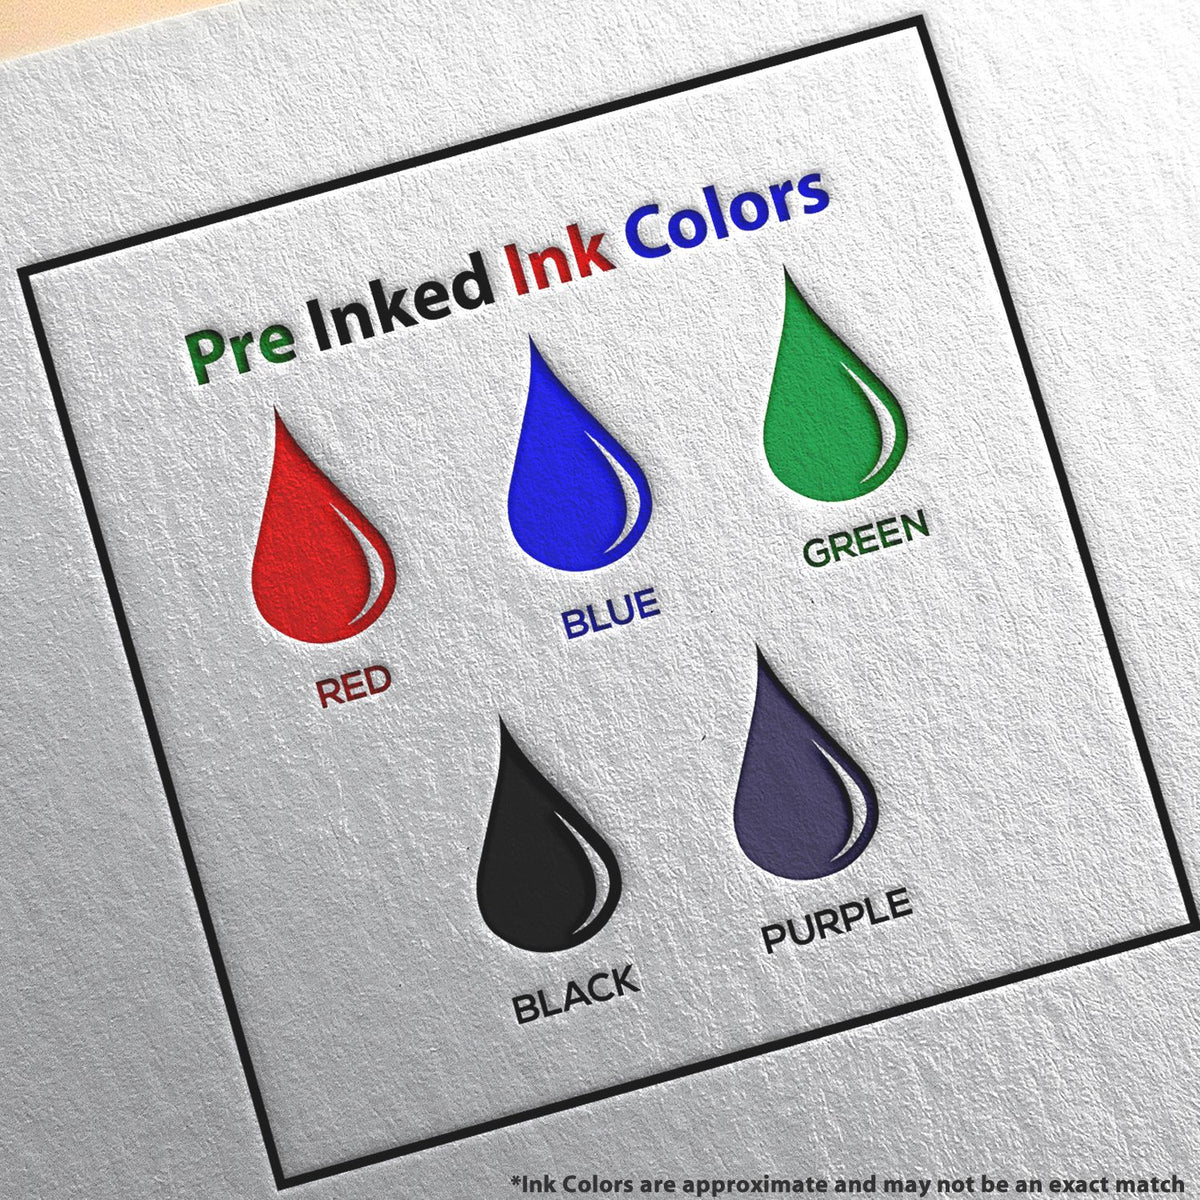 A picture showing the different ink colors or hues available for the Slim Pre-Inked Michigan Architect Seal Stamp product.